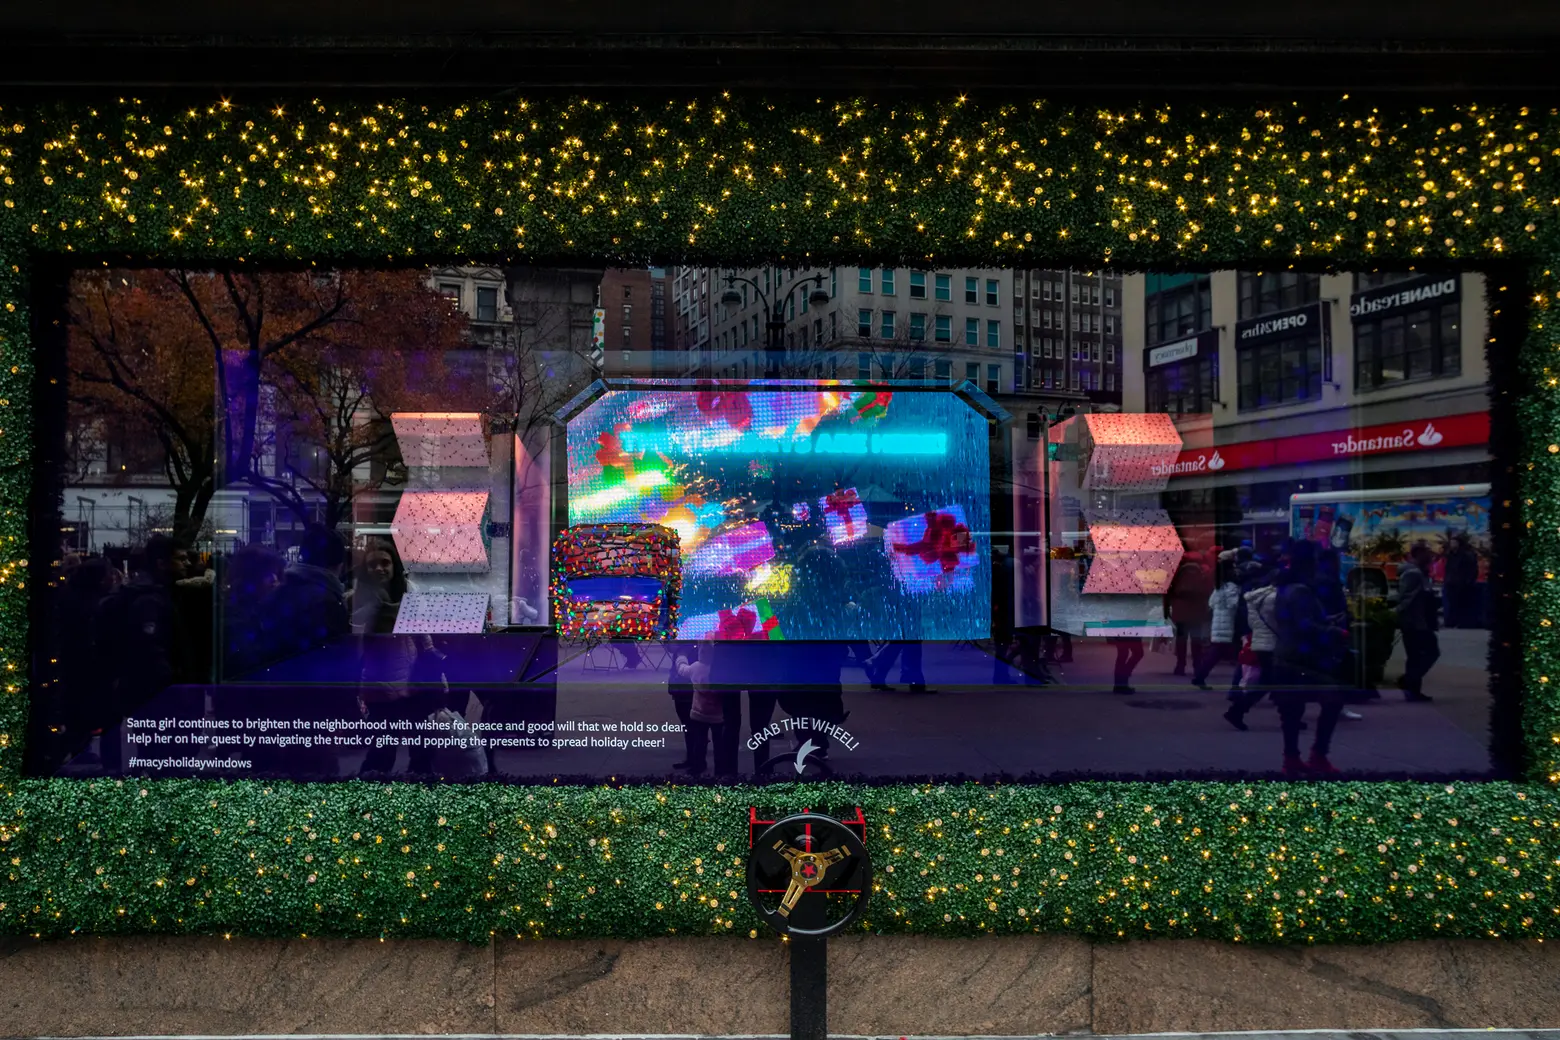 9 Stunning Department Store Holiday Windows to Check Out in NYC 2018